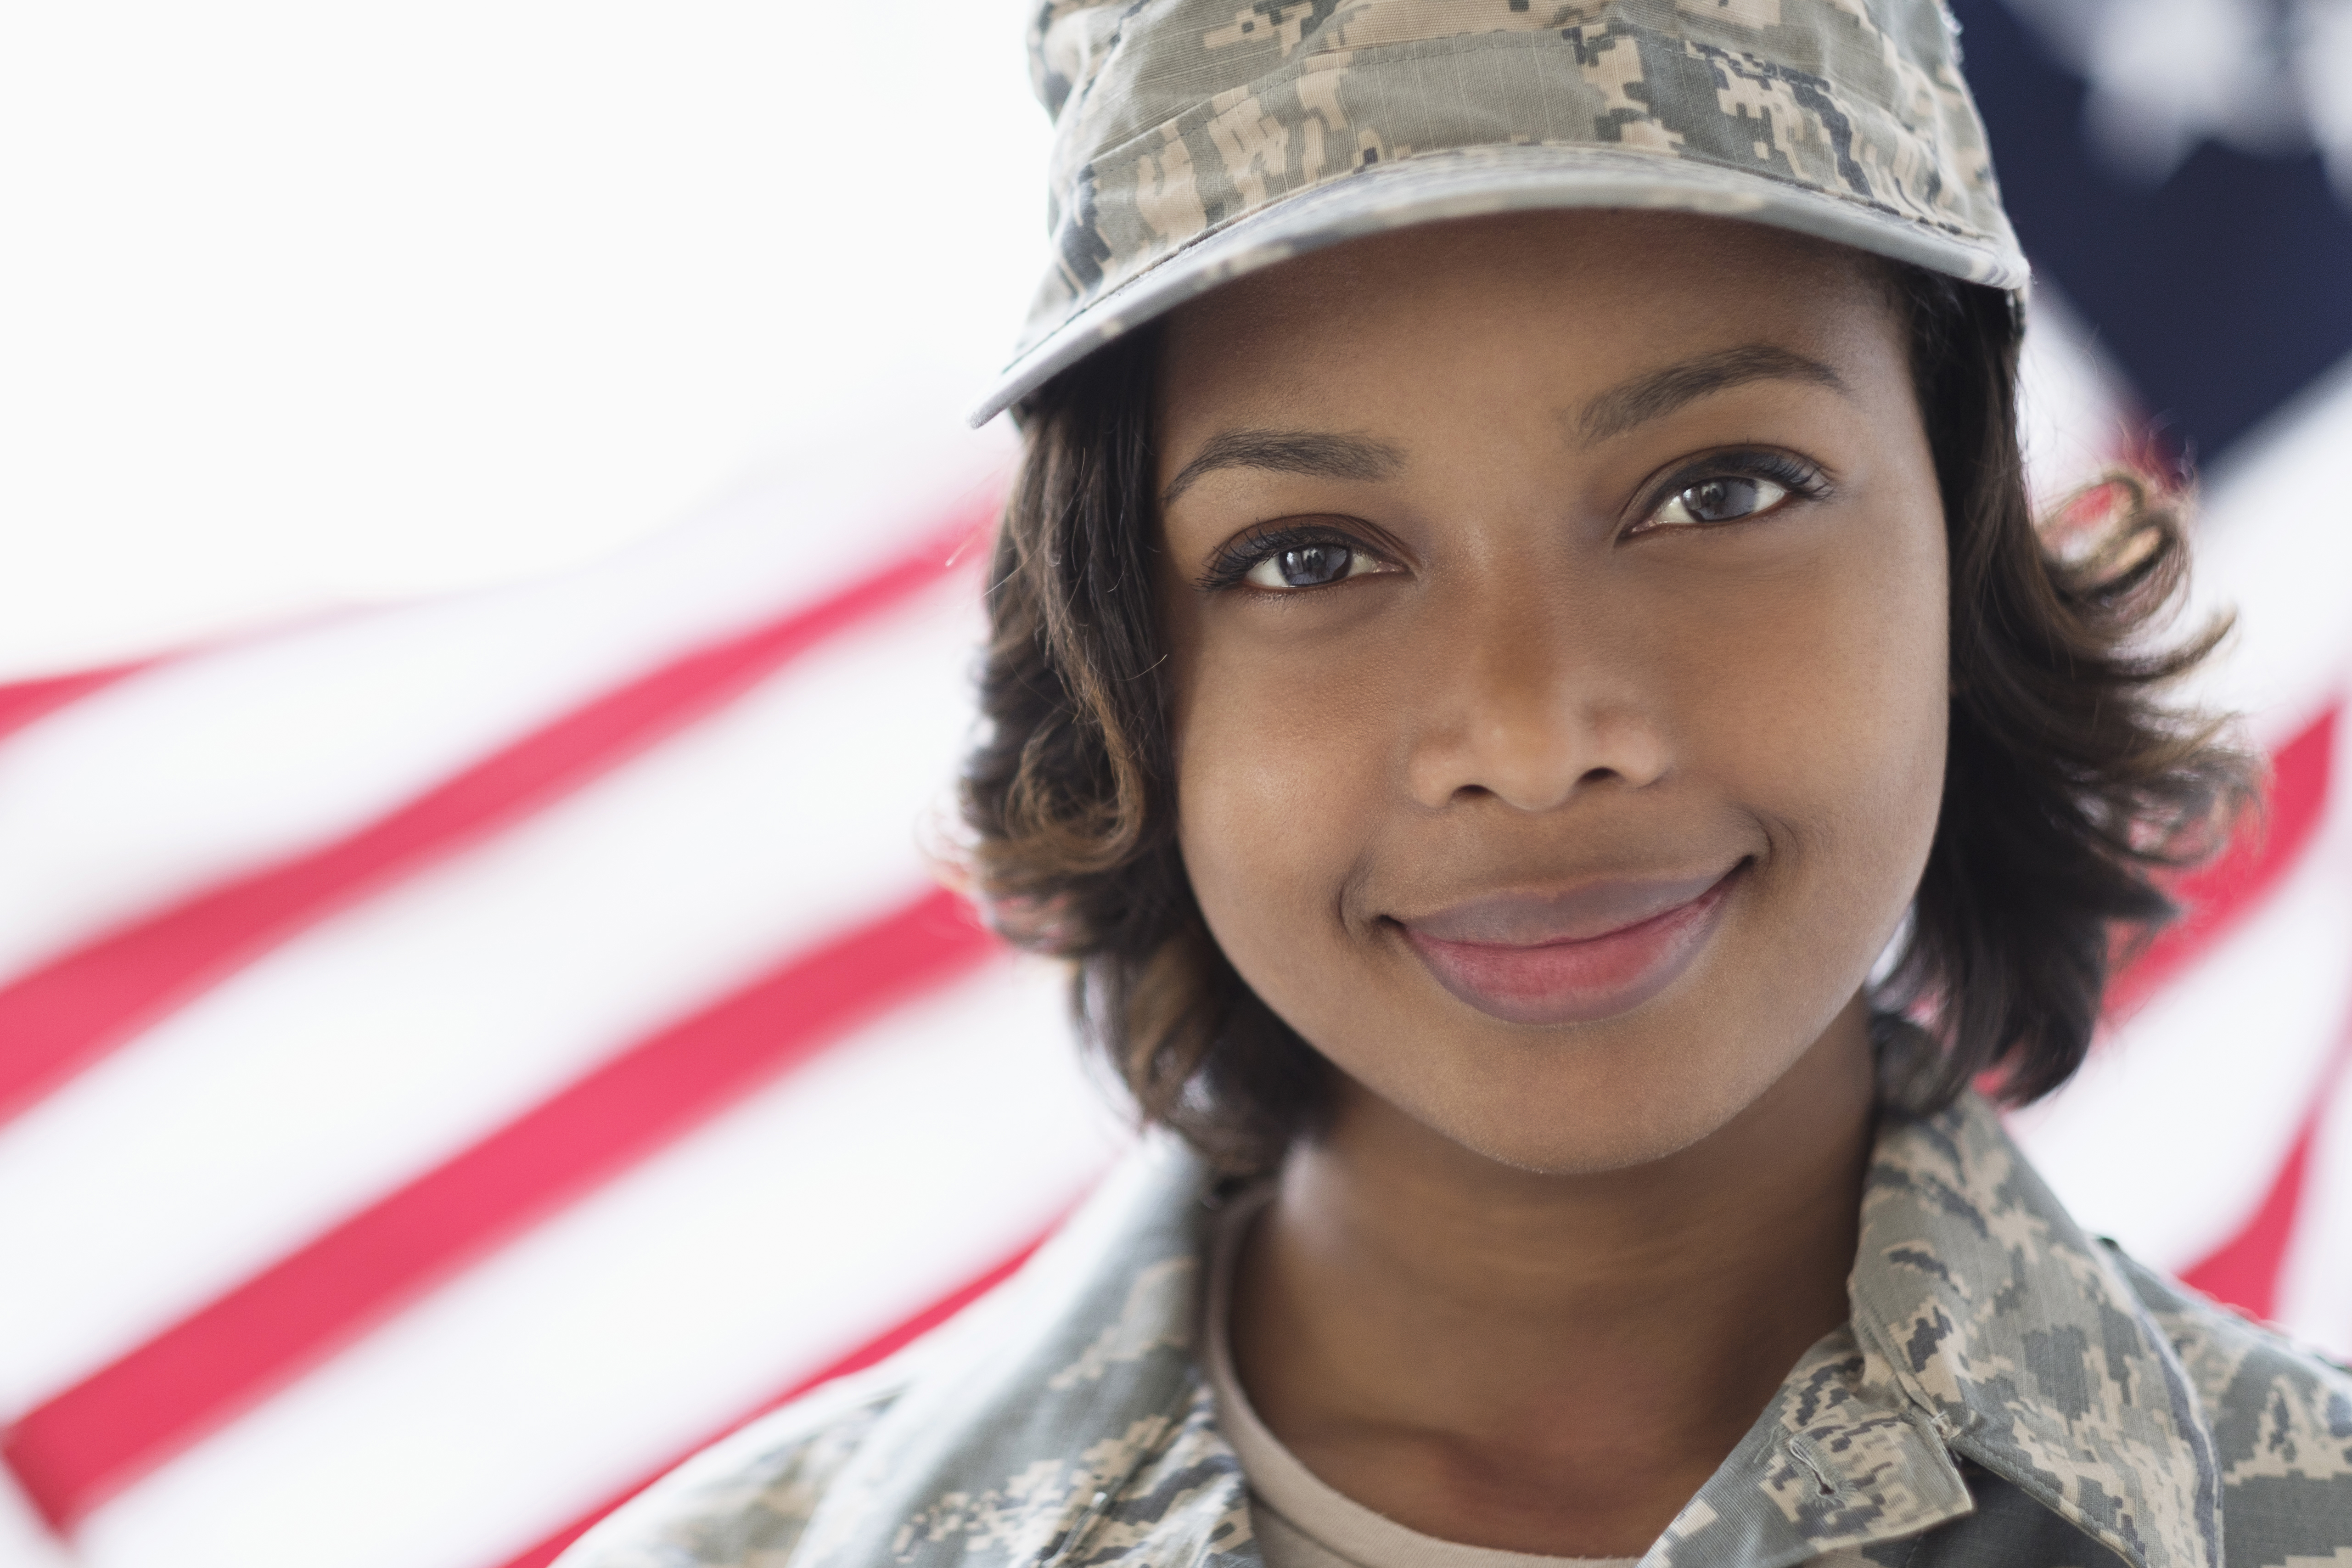 Portrait of smiling Mixed Race soldier near American flag